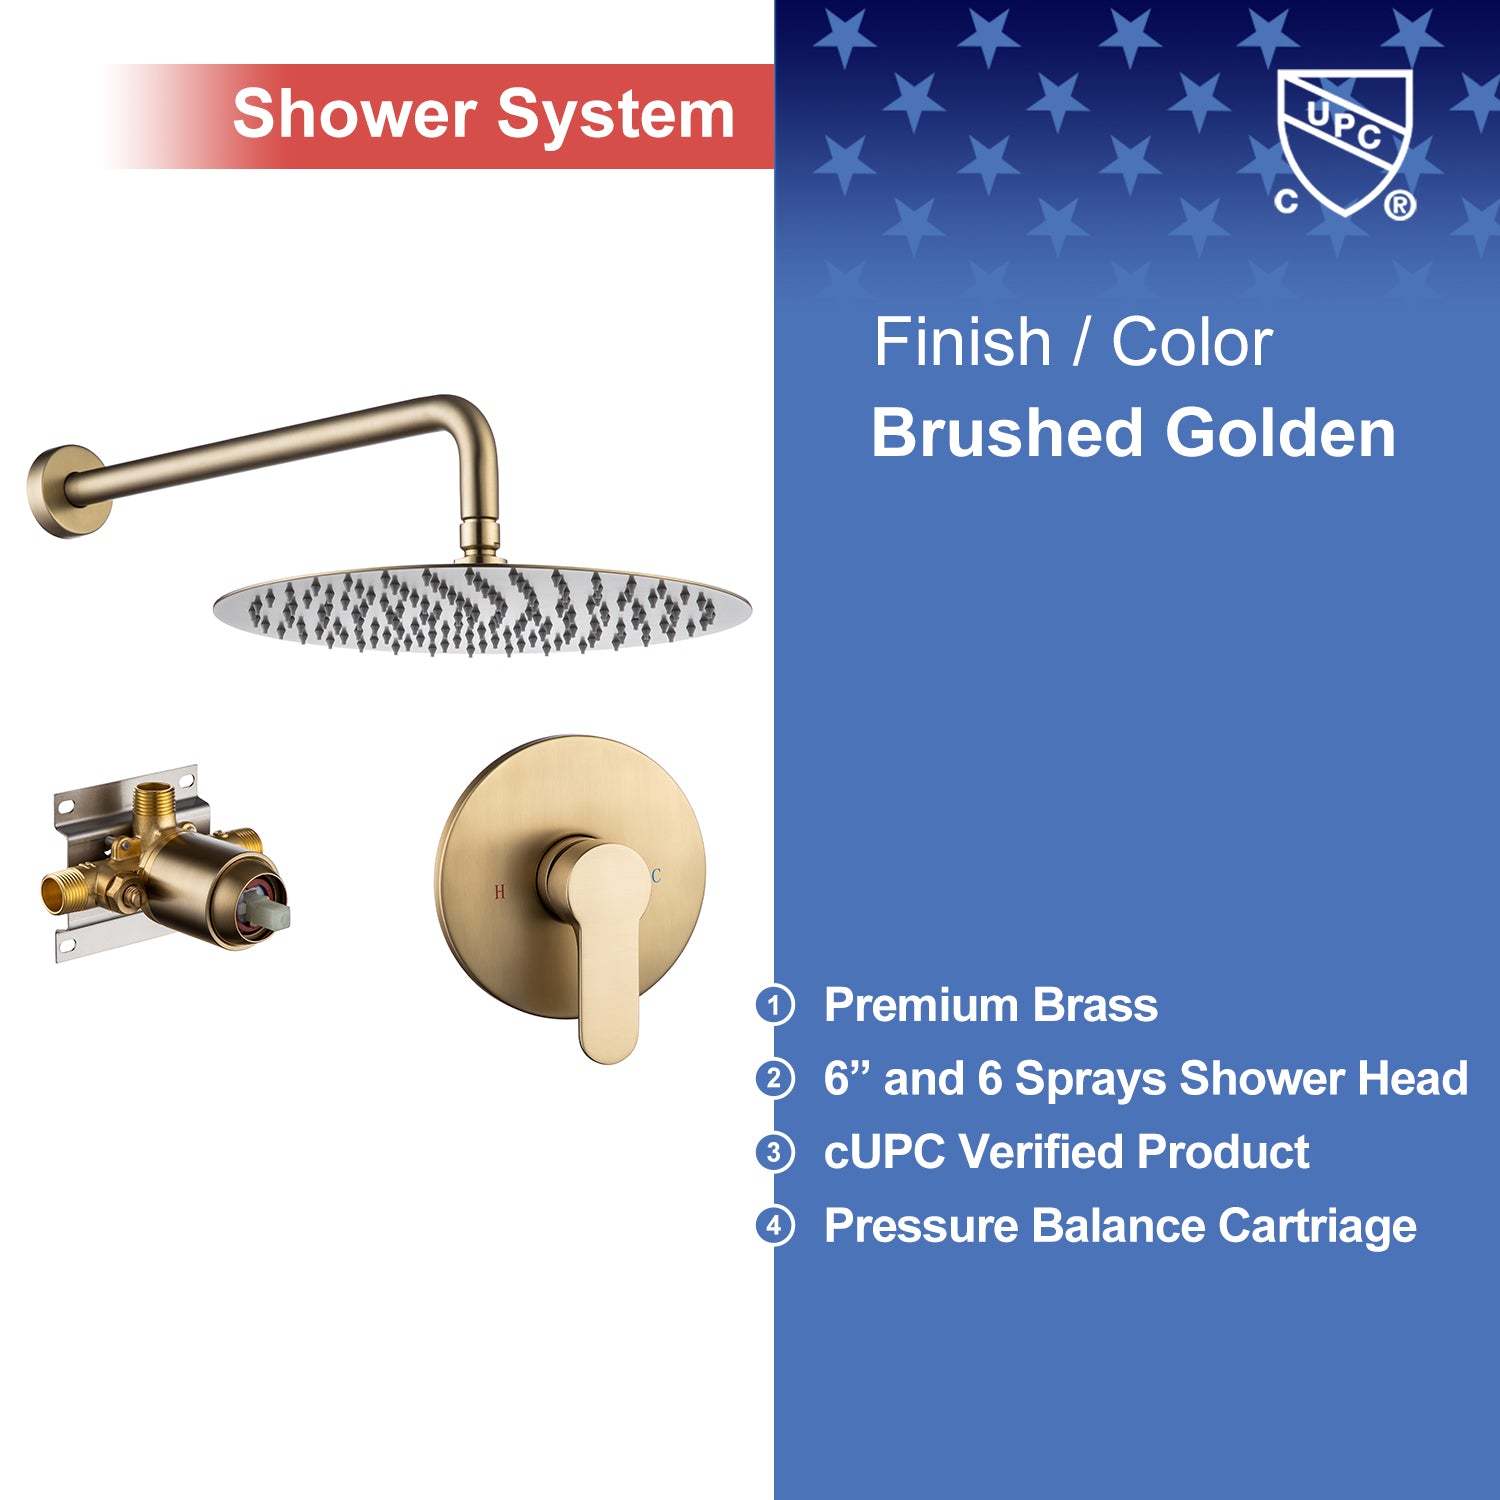 【Rainlex RX96201-10】10" Shower Head Wall-Mount  Pressure Balance Round Shower Faucet(Rough-in Valve Included)